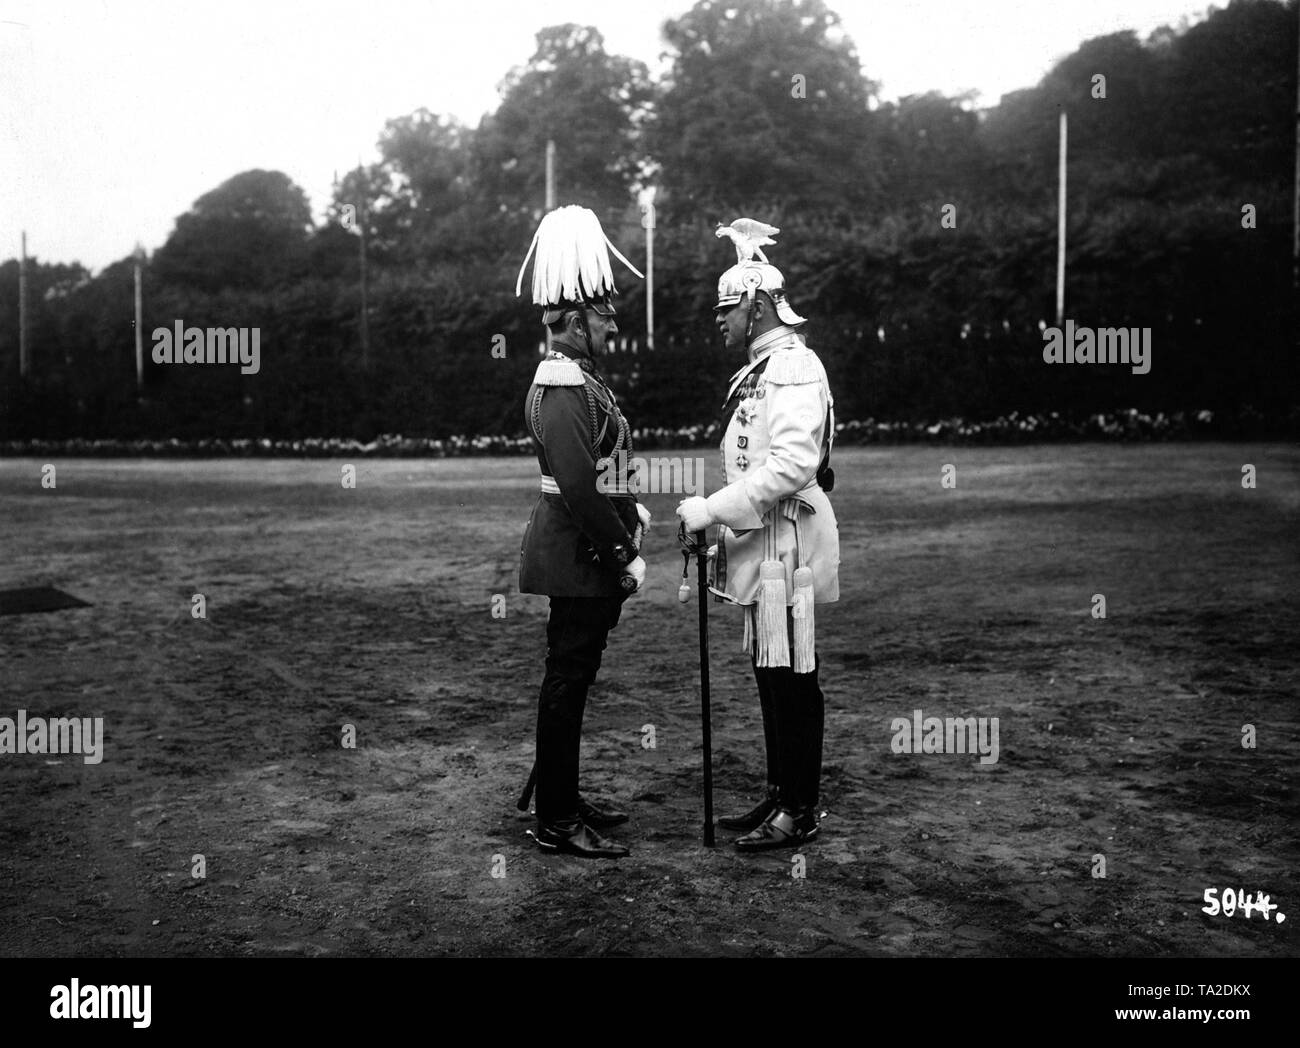 Emperor Wilhelm II (left) and Egon Maximilian II Prince of Fuerstenberg in conversation .The emperor can be seen in General Field Marshal uniform with a baton.The Prince is wearing the uniform of the cuirassier Gardes du Corps with the accompanying eagle helmet. Stock Photo